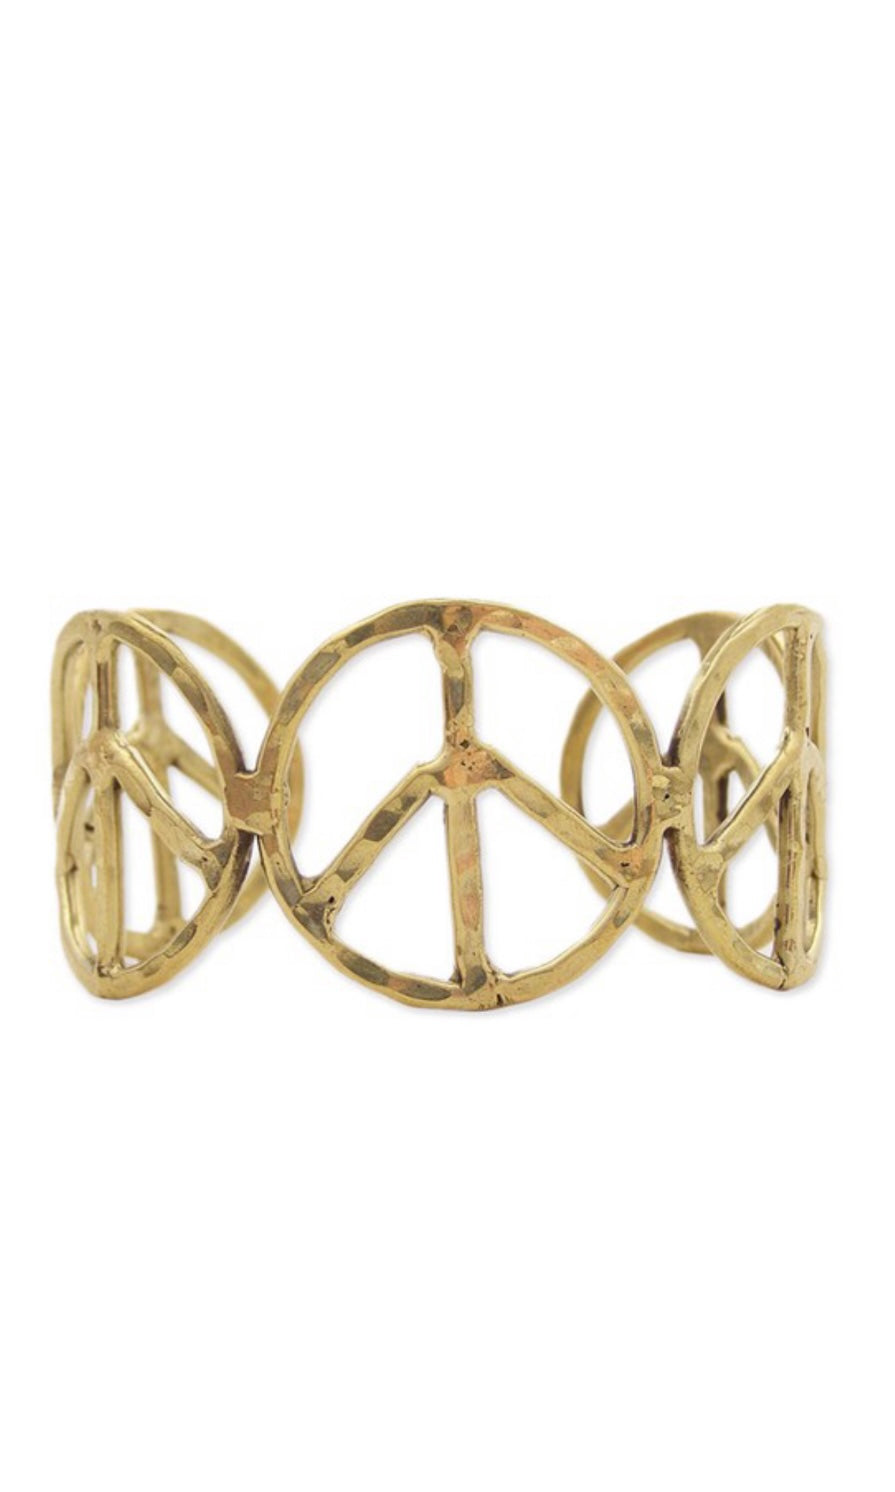 Boho Chic Gold Hammered Woodstock Peace Sign Cuff Bralette